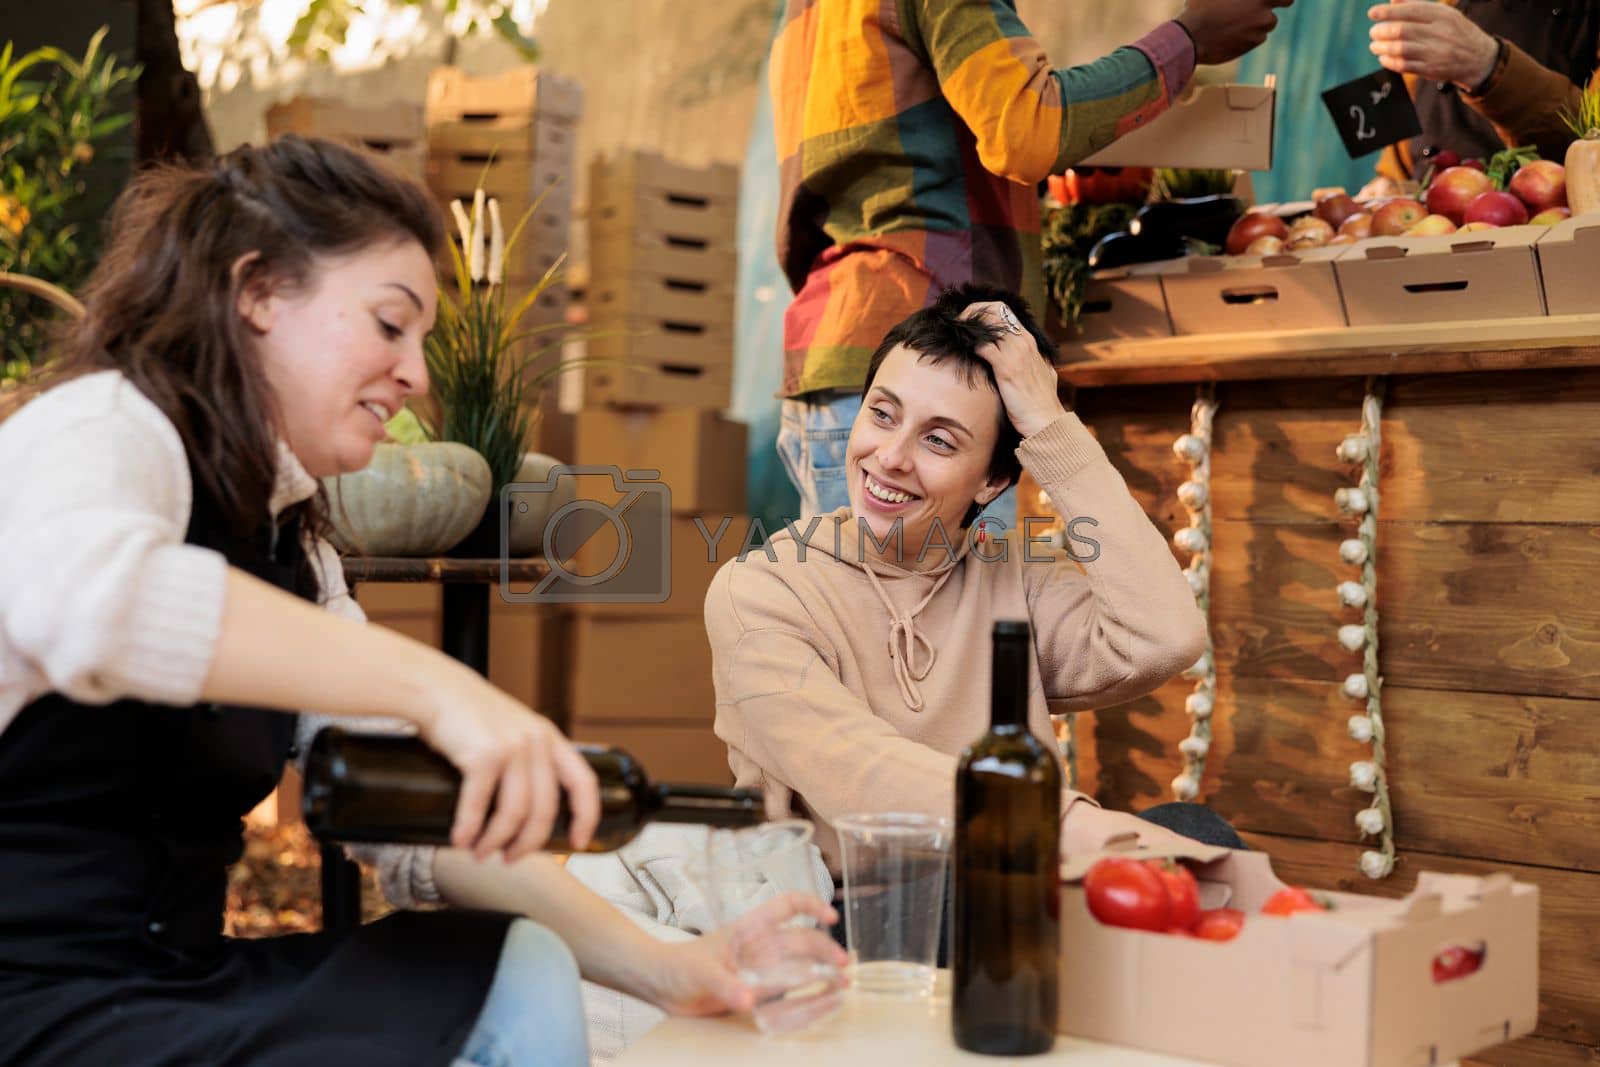 Royalty free image of Two happy persons at food festival tasting homemade wine by DCStudio